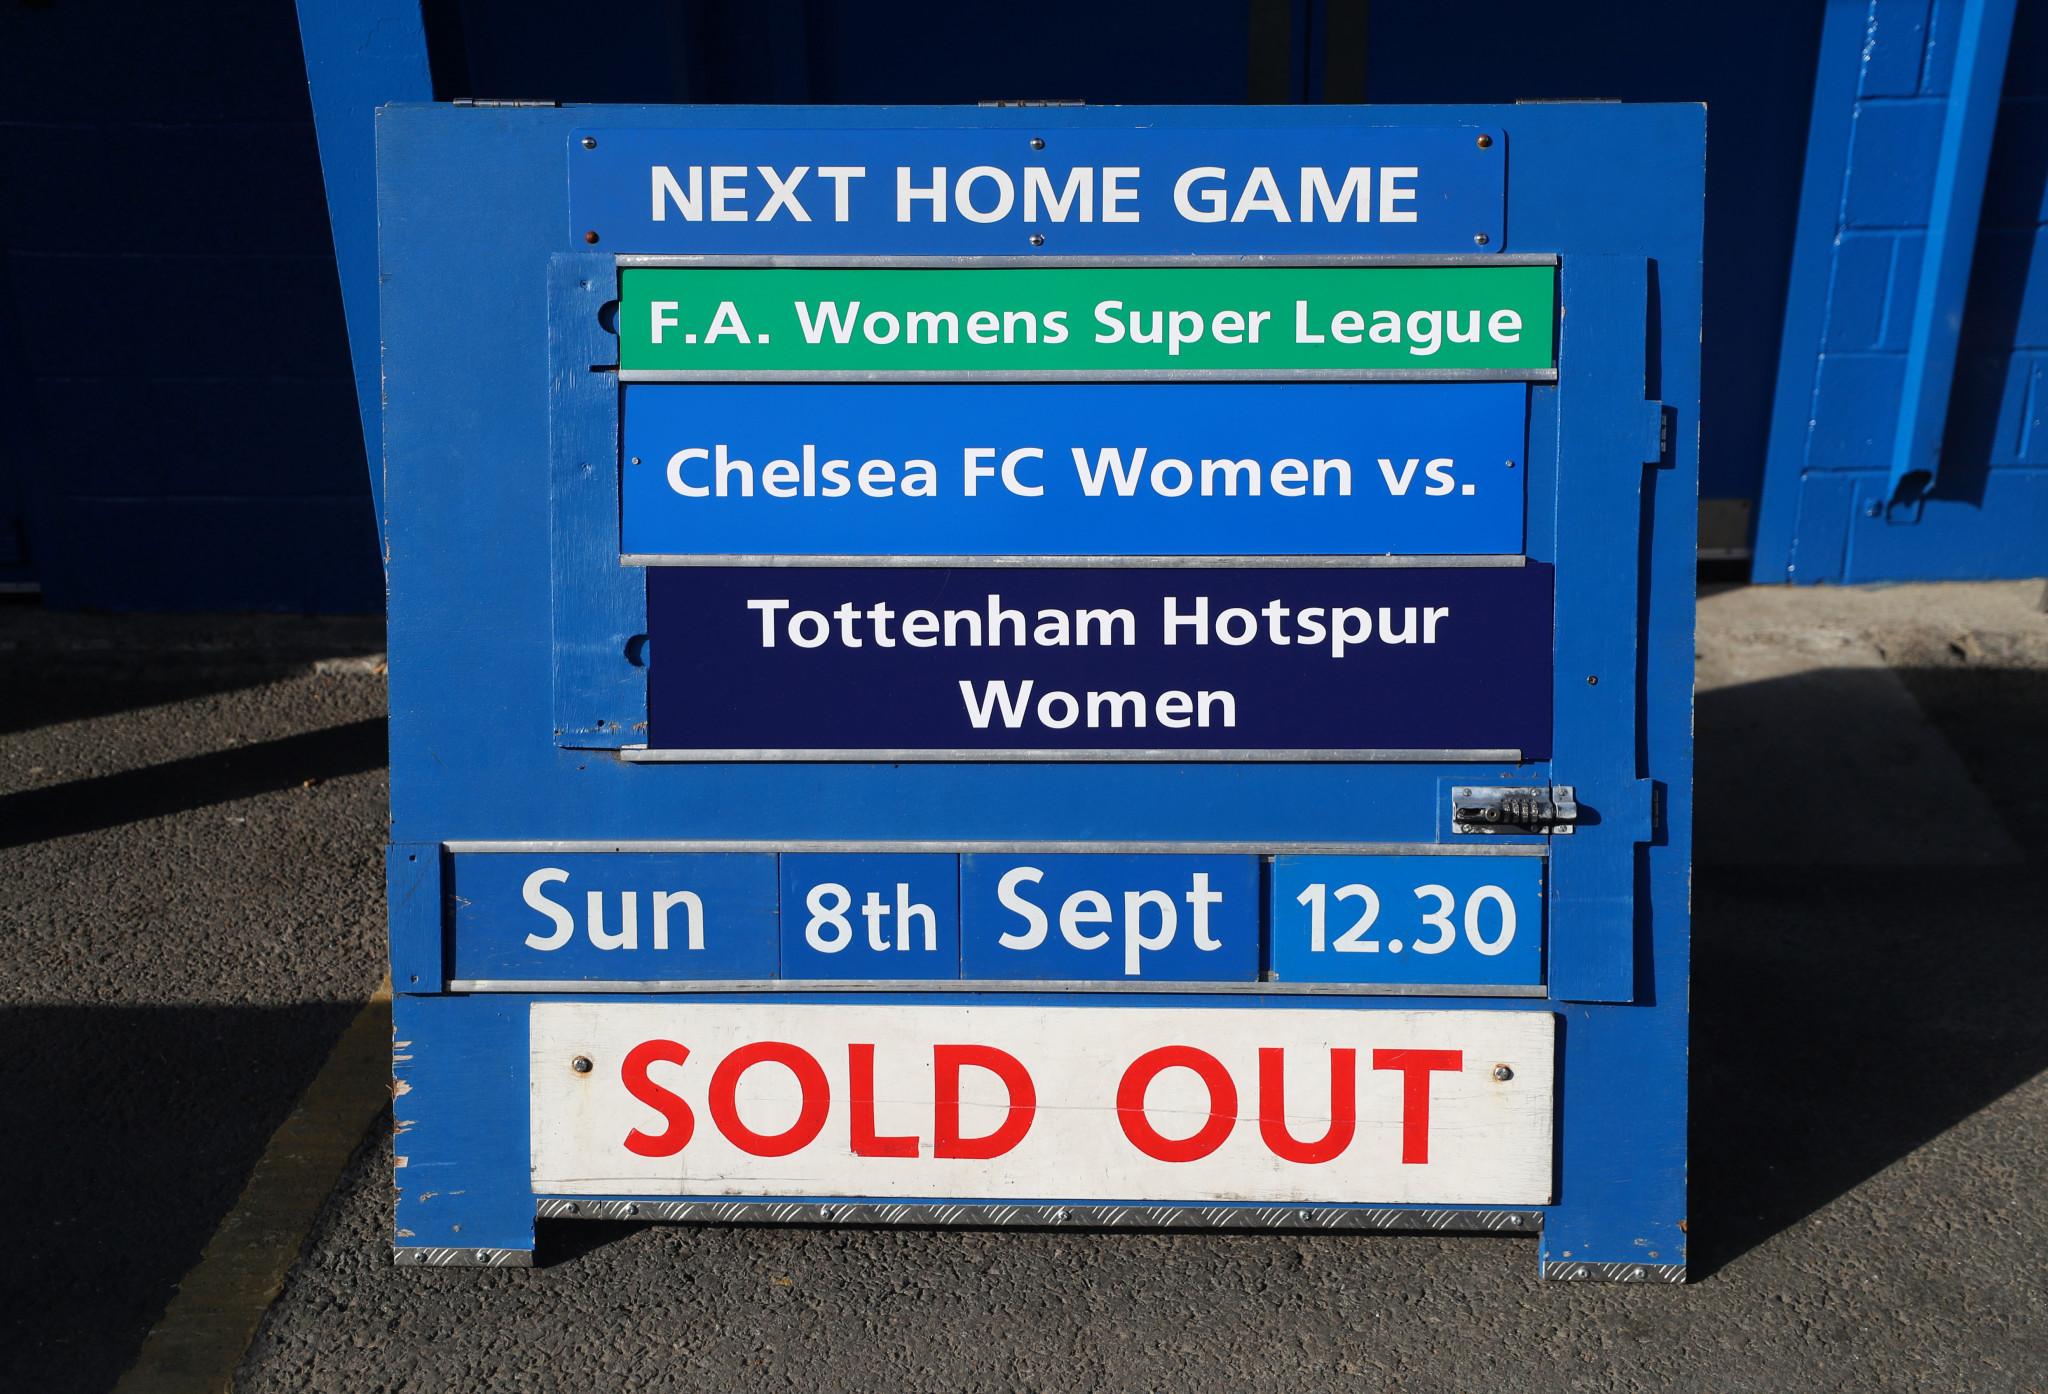 The FA Women's Super League match between Chelsea and Tottenham Hotspur, which offered free tickets, was supposedly sold out ©Getty Images